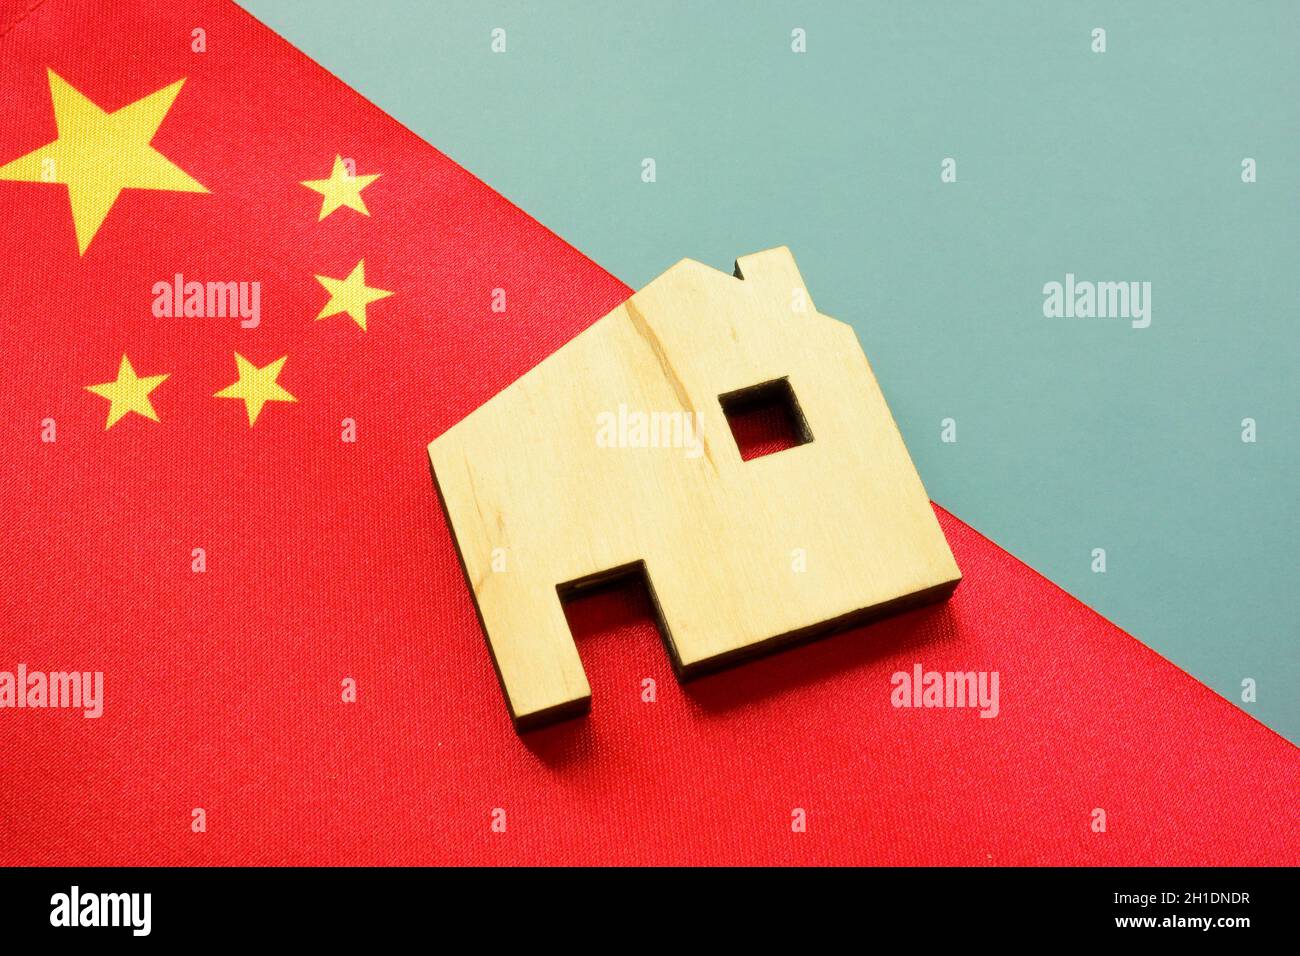 China flag and house model as a symbol of the developers or construction industry. Stock Photo